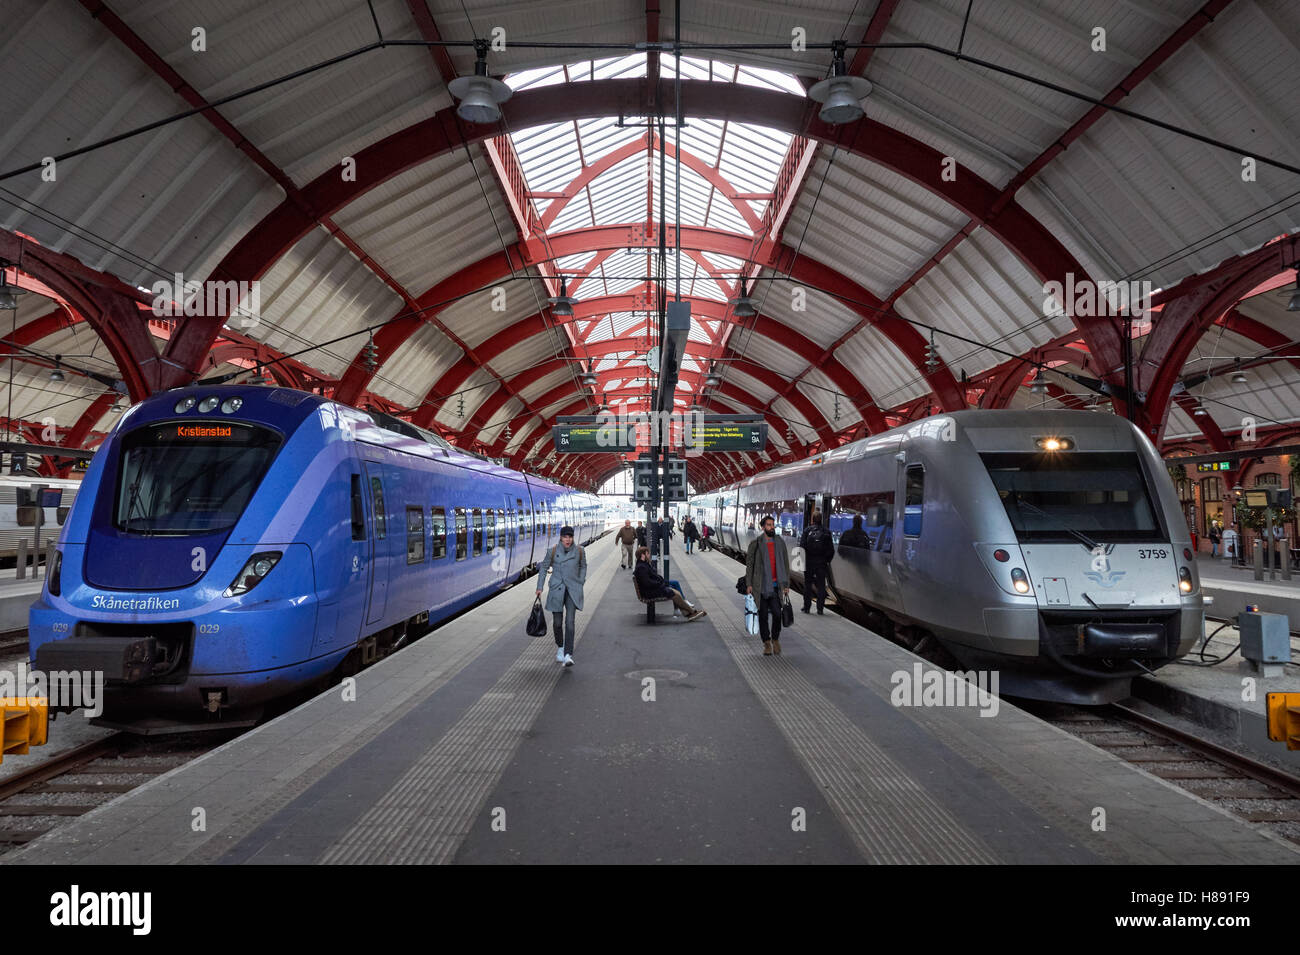 Trains at Malmo central station, Sweden Stock Photo